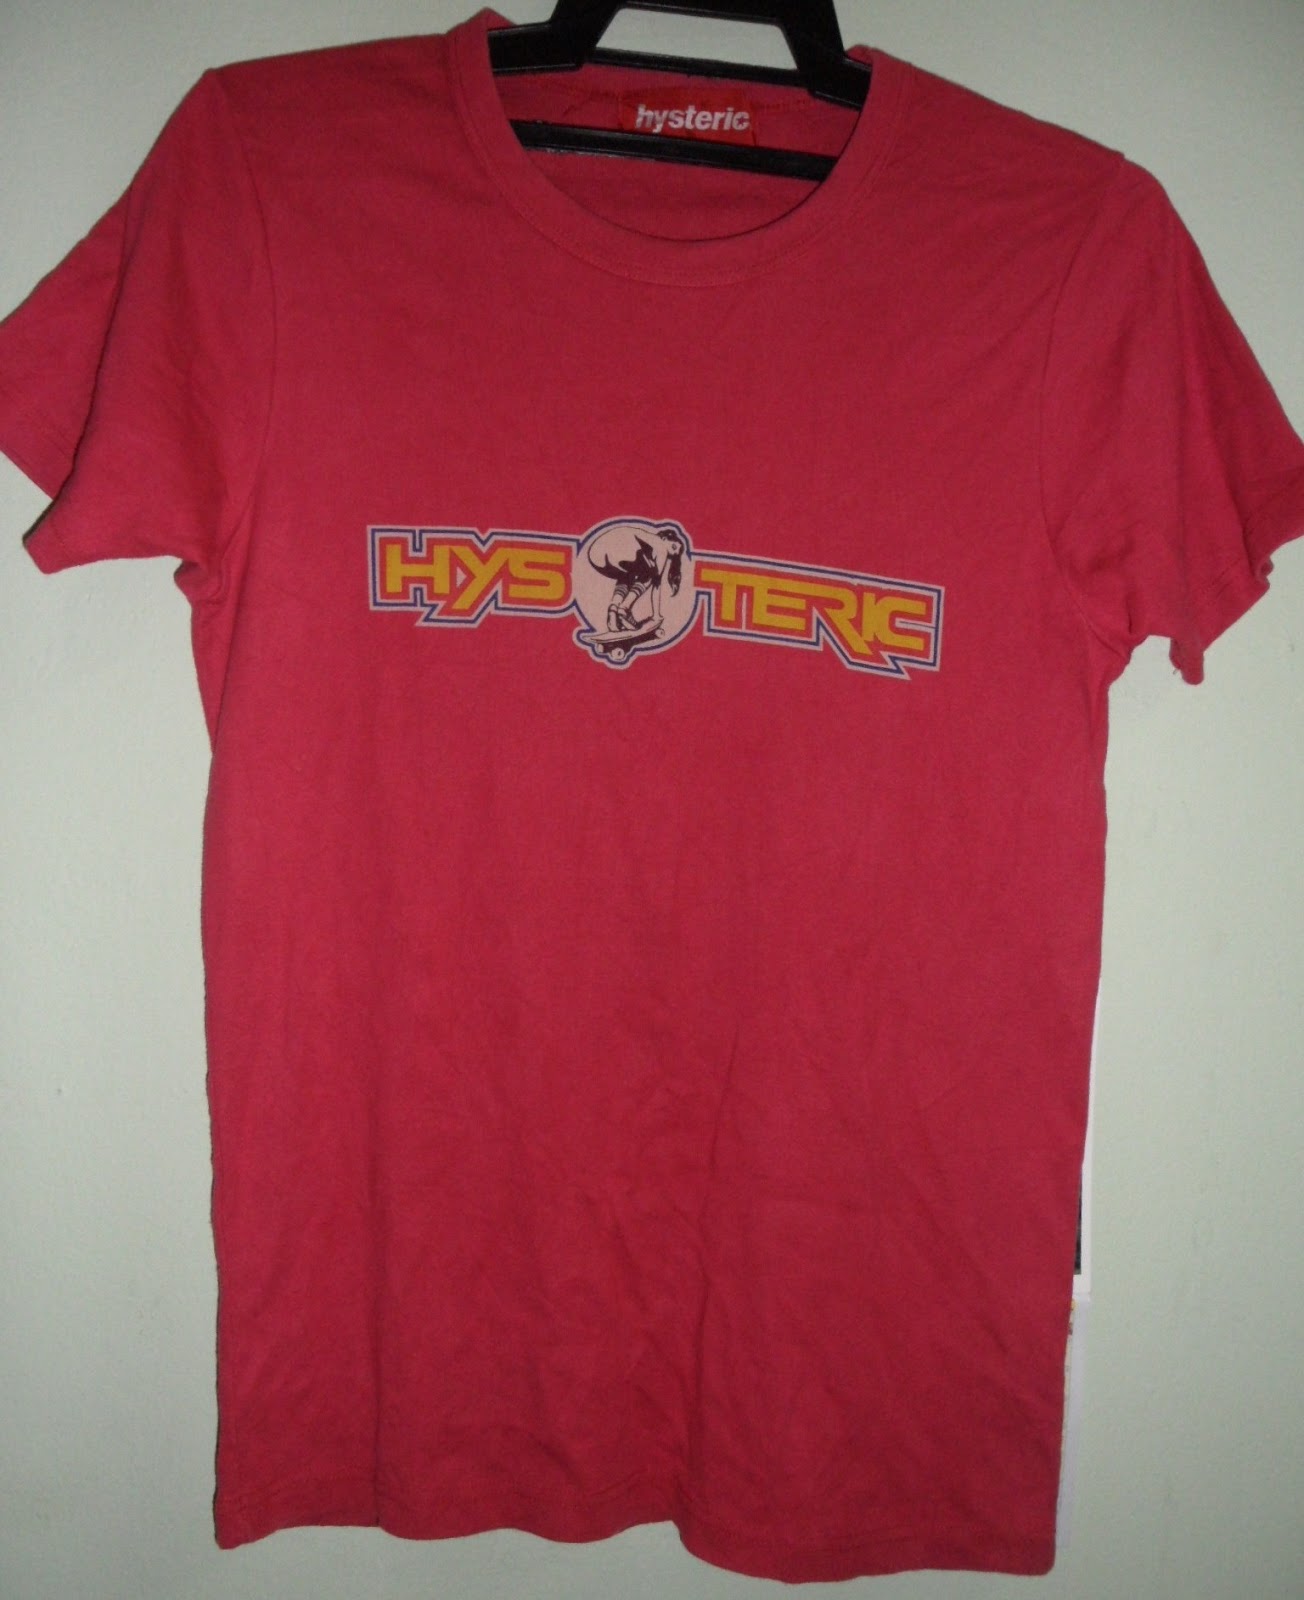 Clayback Bush Thrift Store: [T Shirt] Hysteric Glamour Red Tee **SOLD**